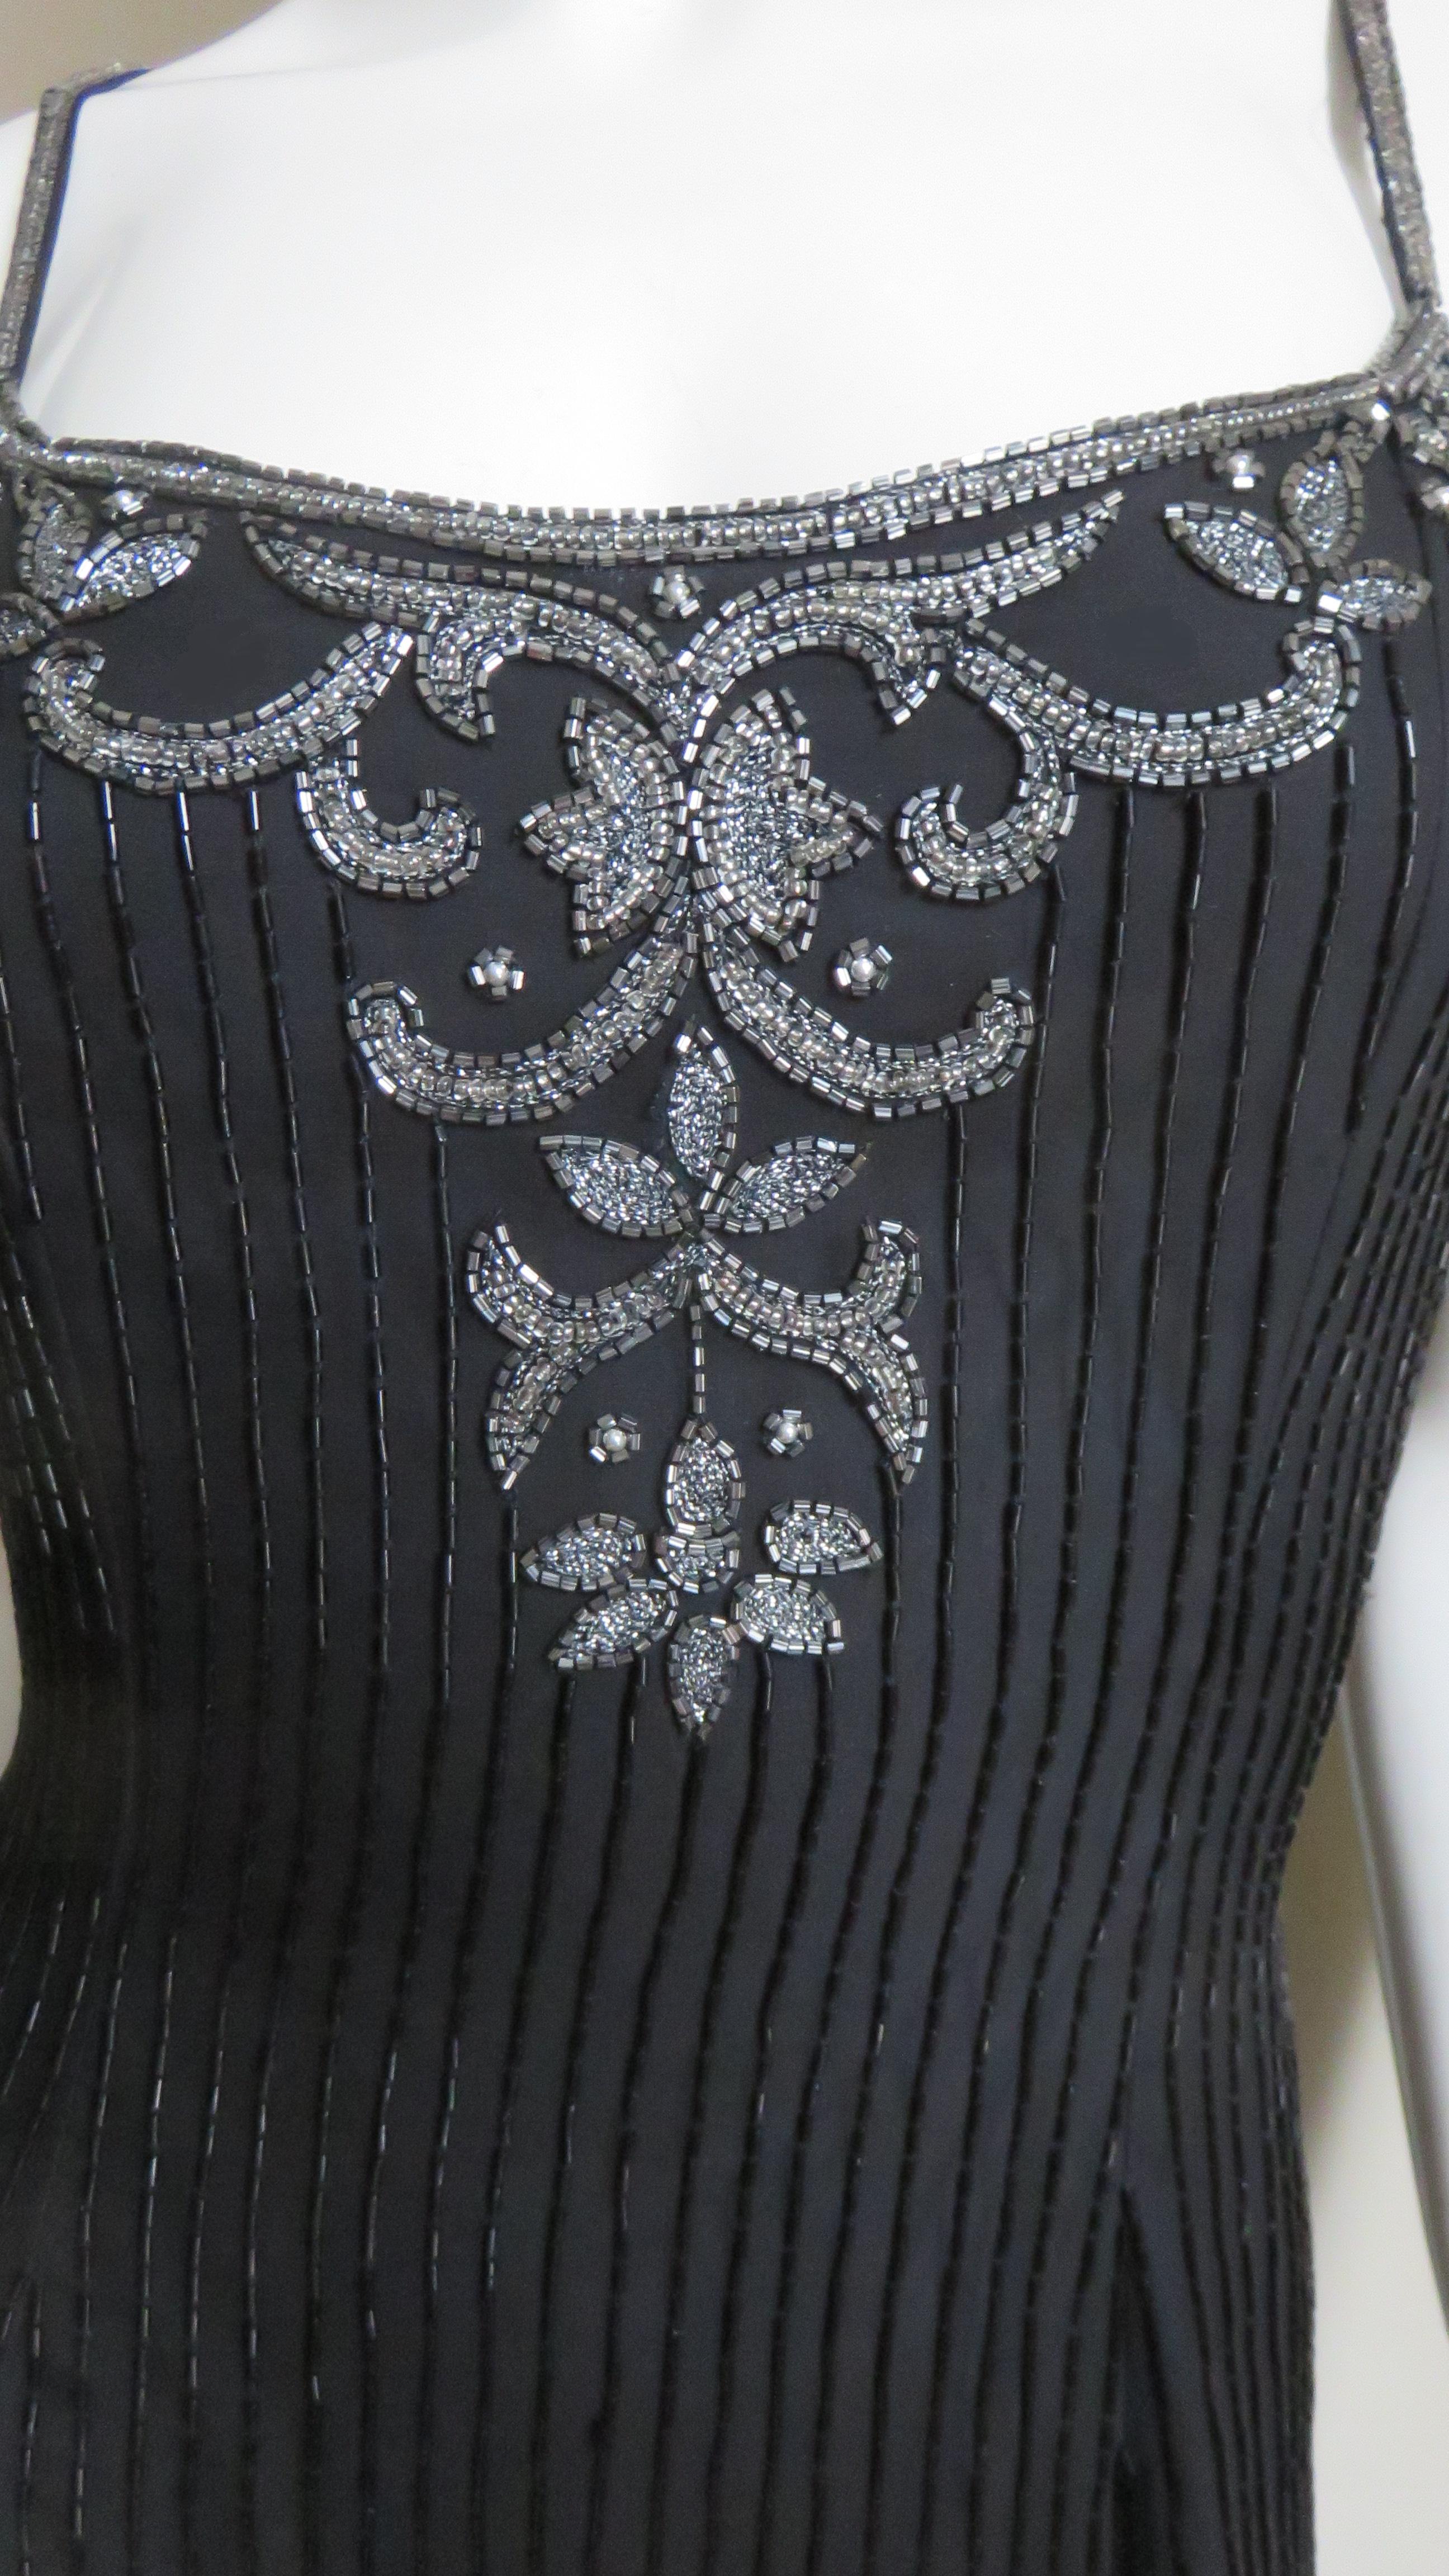 Sonia Rykiel Gown with Sheer Back and Beading 2